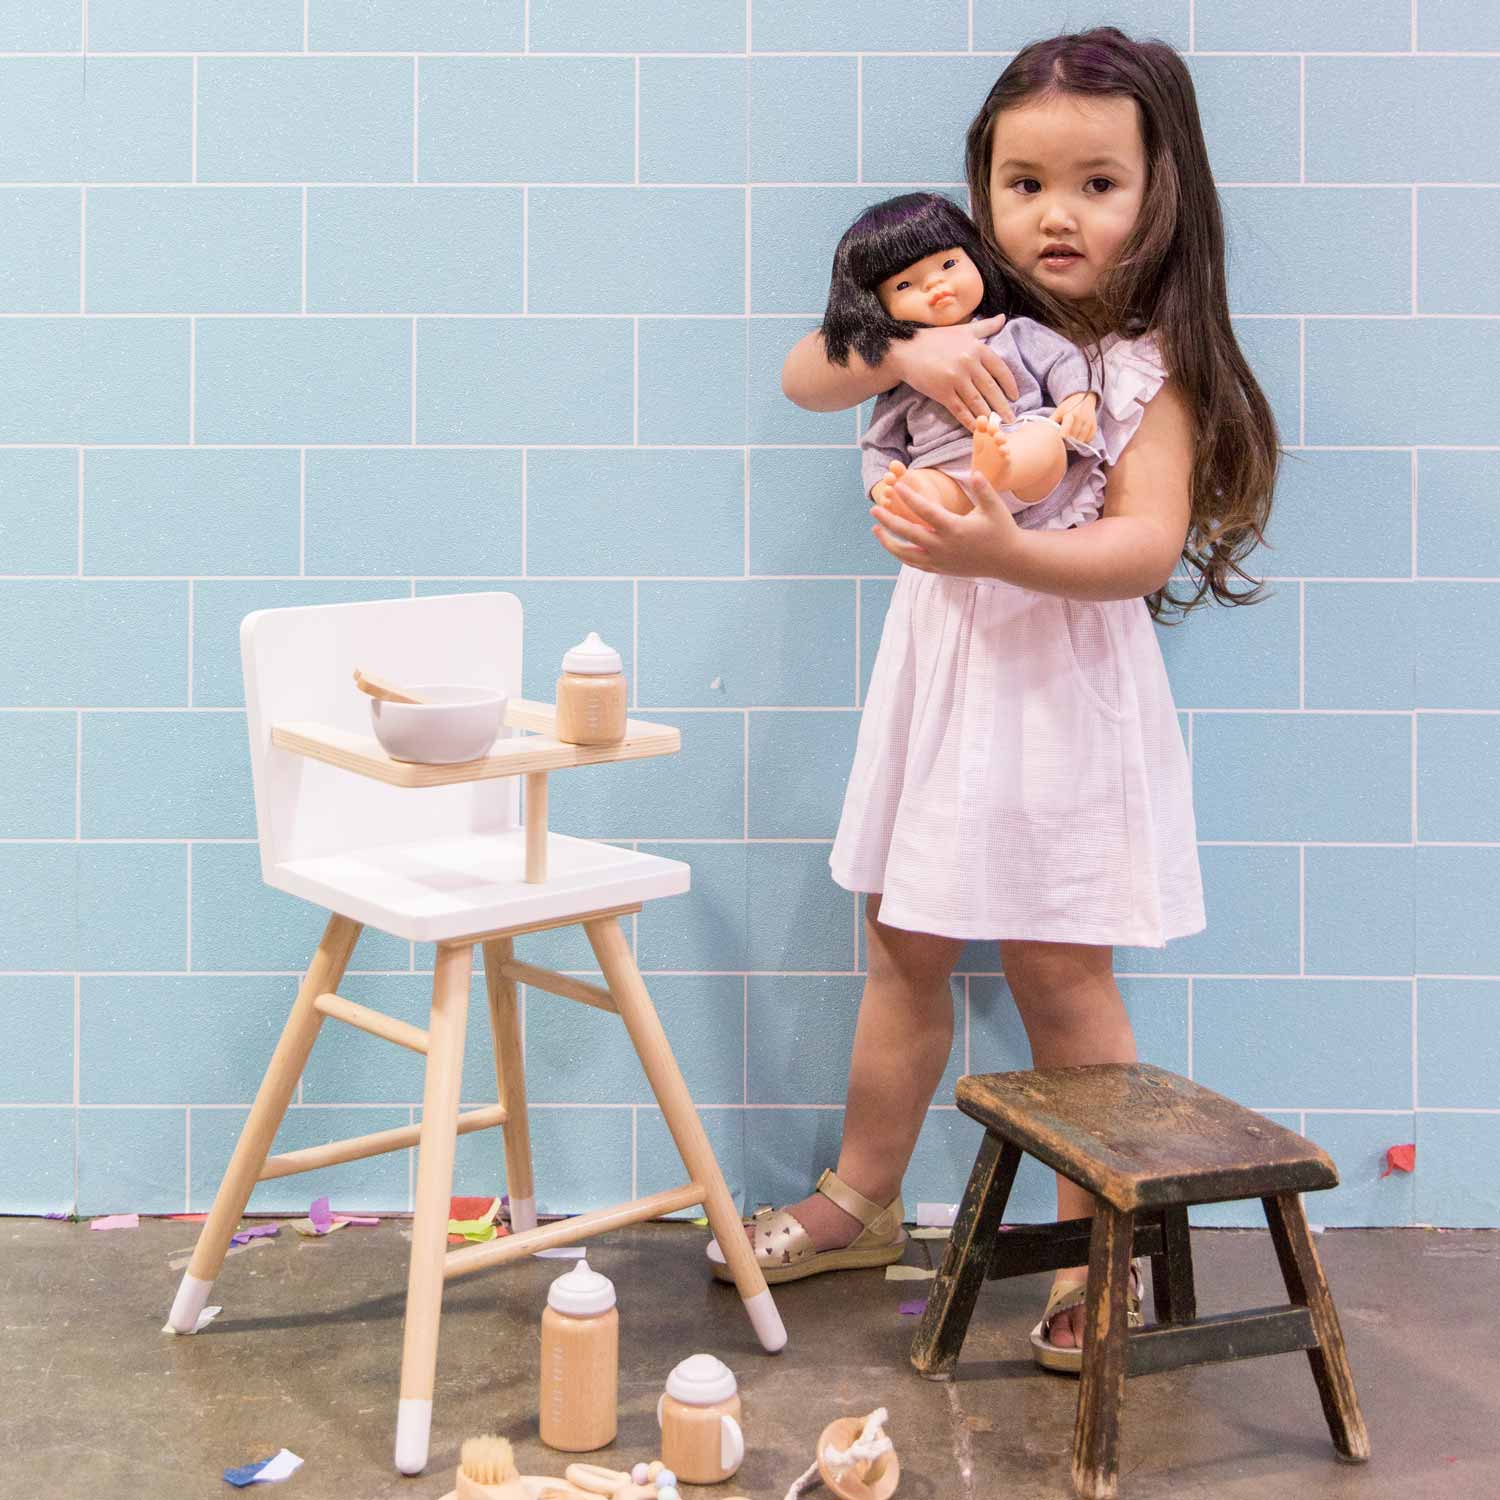 On the Blog: Toy Safety for your Home & Play! 👍